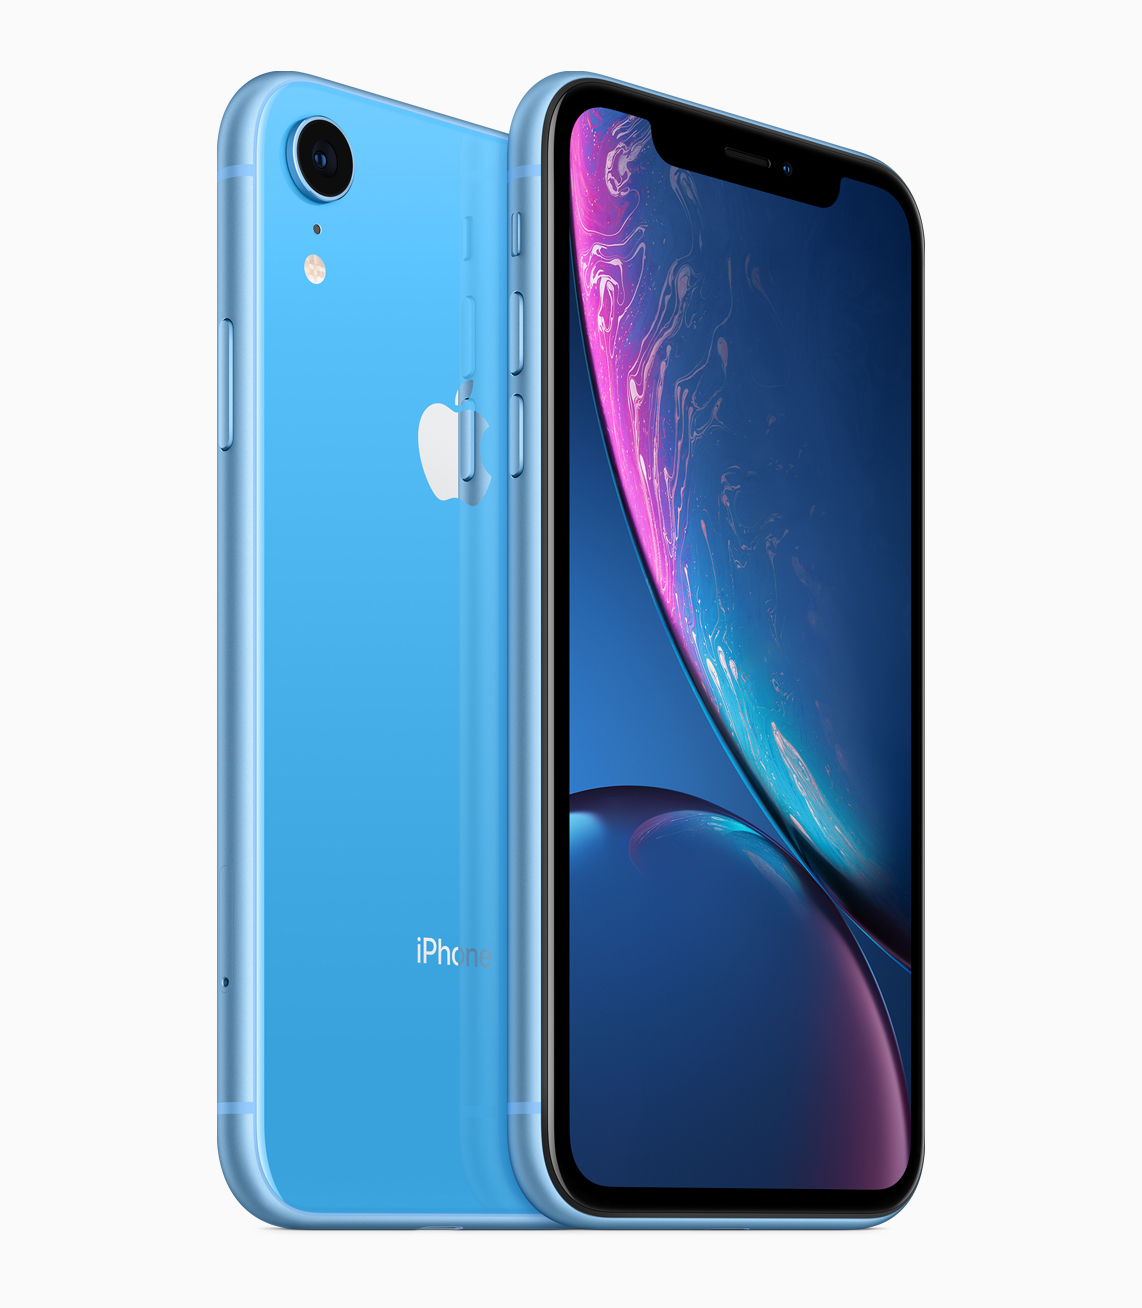 Here's Apple's new, cheaper iPhone: iPhone Xr - AfterDawn